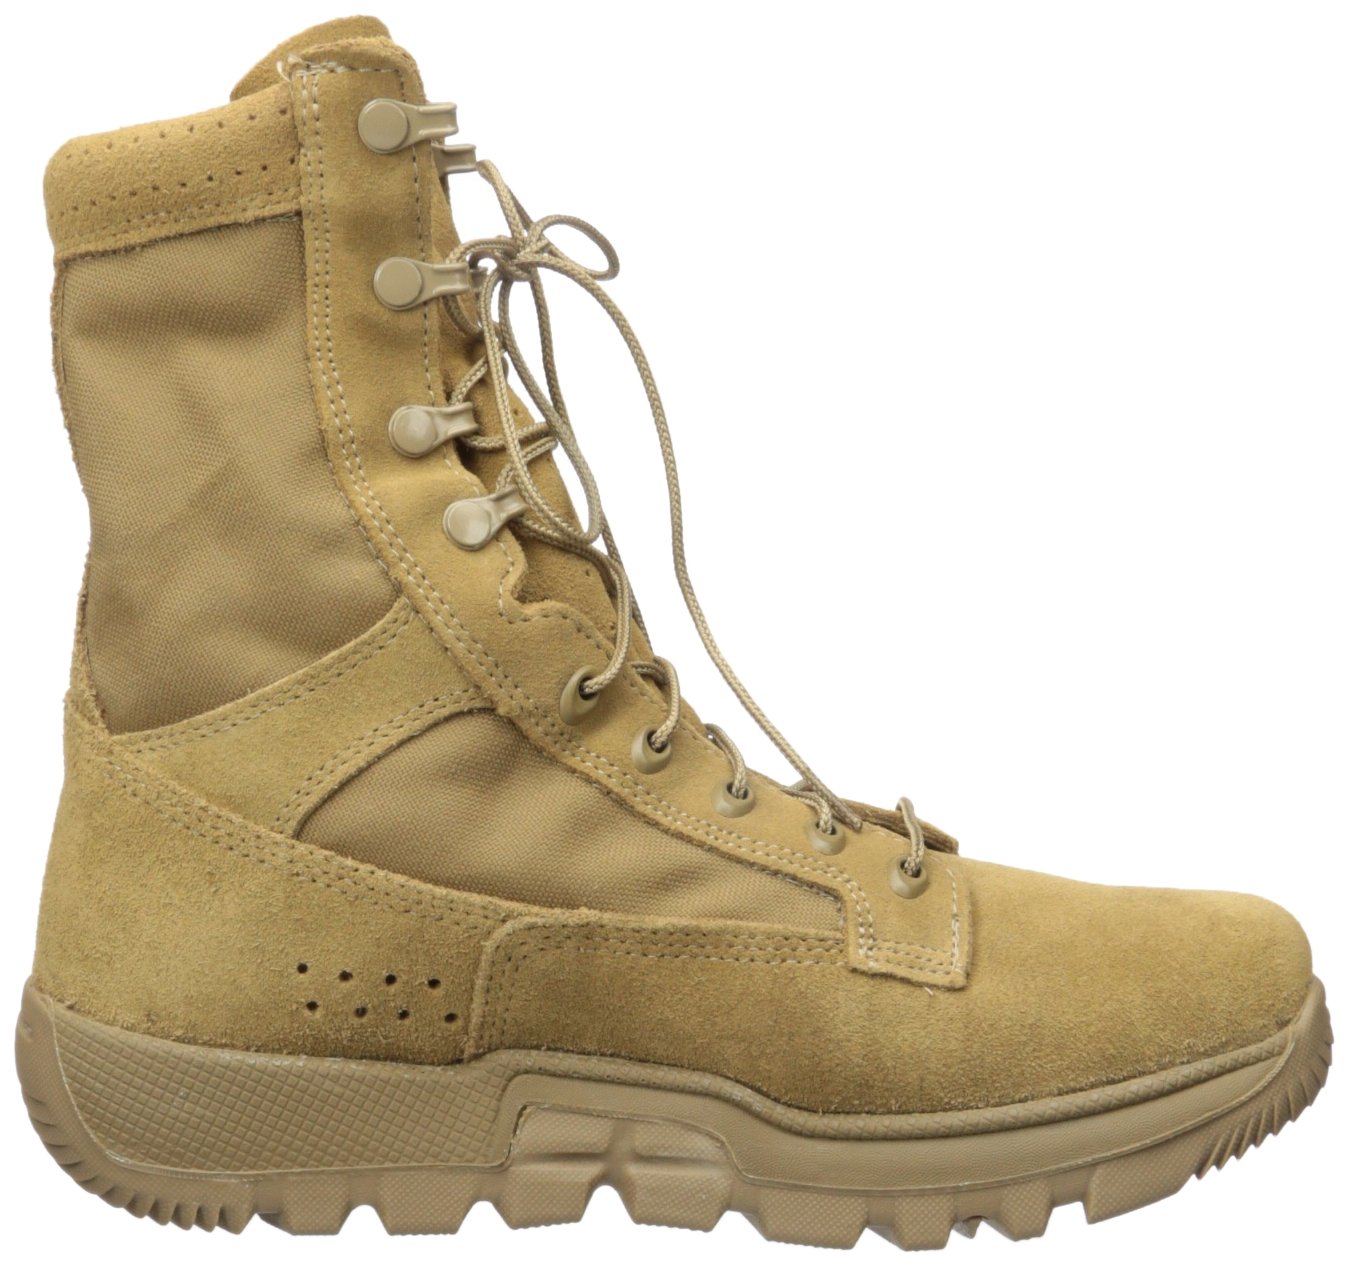 Rocky Men's Rkc042 Military and Tactical Boot